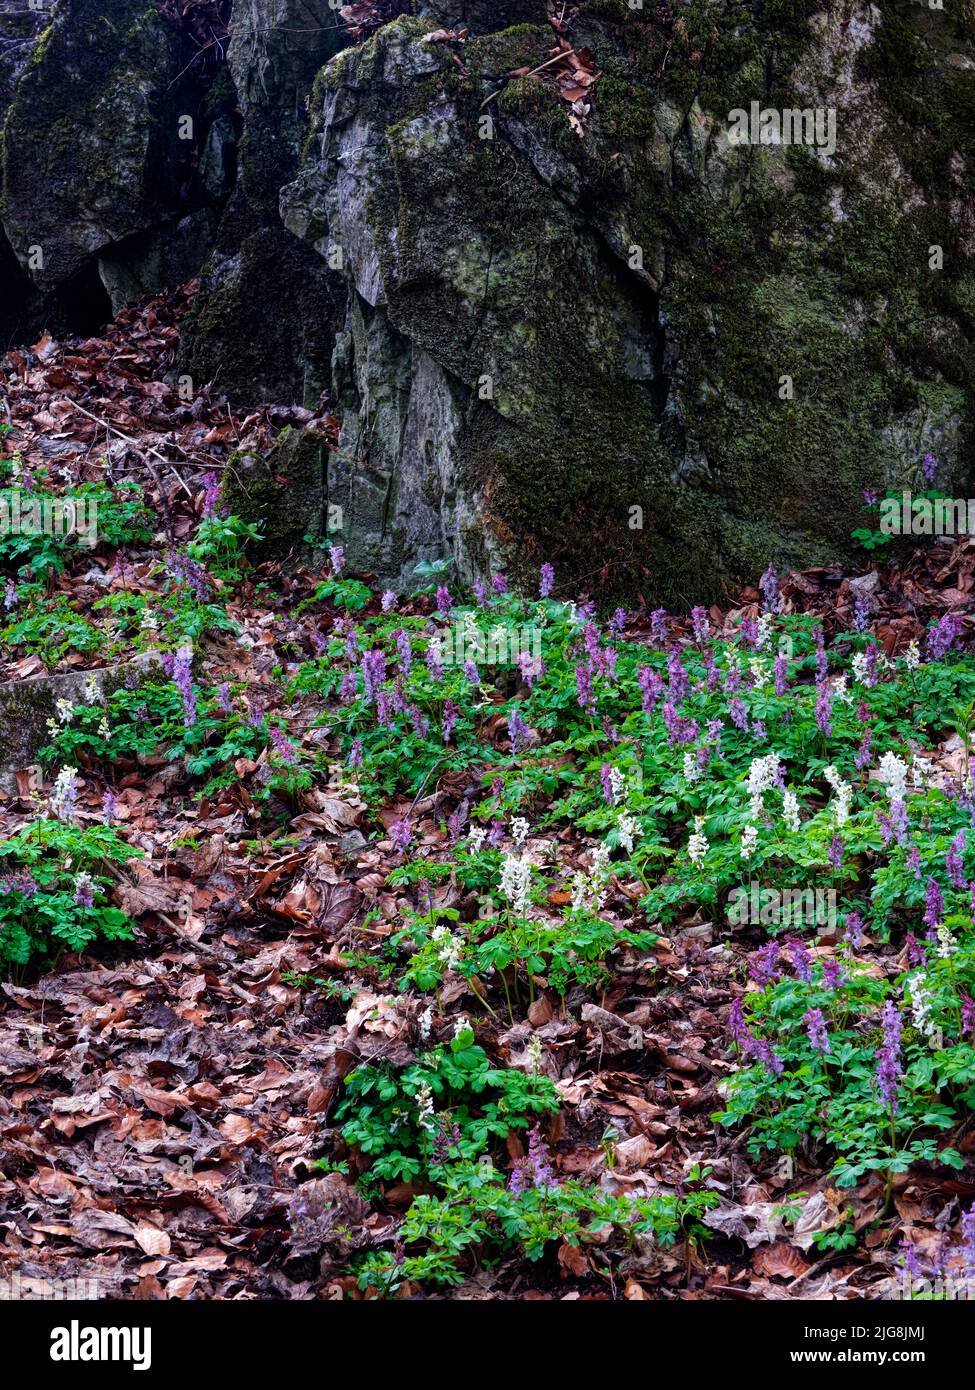 Europe, Germany, Hesse, Westerwald, Lahn-Dill-Bergland, Geopark Westerwald-Lahn-Taunus, Lahn-Dill-Kreis, Westerwaldsteig, Breitscheid, spring in the nature reserve 'Gasseschlucht', gorge forest with early flowers and dead wood, flowers of the Hohlen Lerchensporn, karst rock Stock Photo